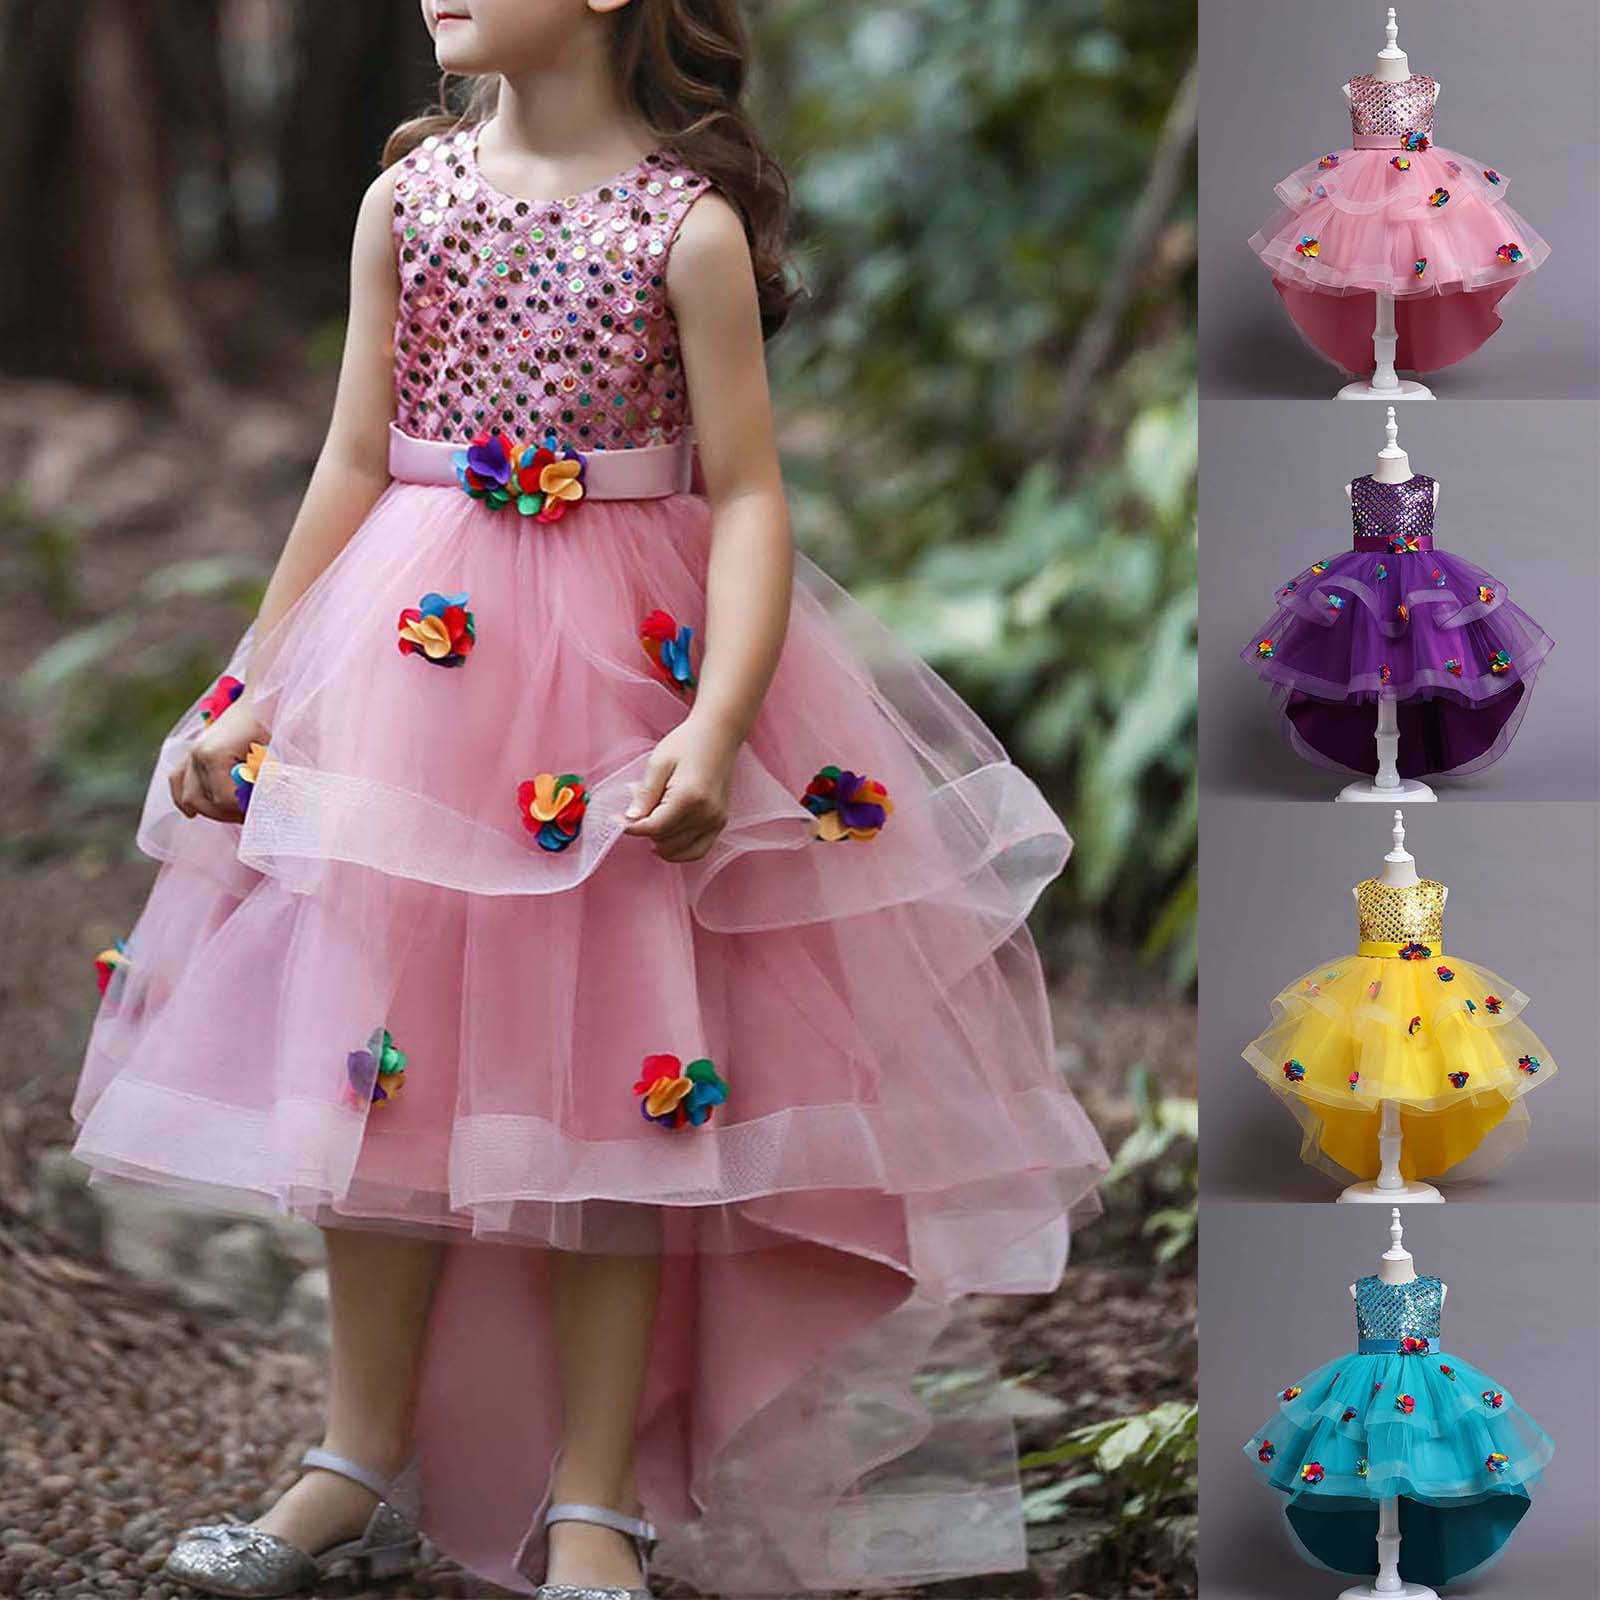 Girls Pink Prom Party Ball Gown Ruffles Flower Girl Dress F131205 - China  Flower Girl Dress and Girl Prom Dress price | Made-in-China.com